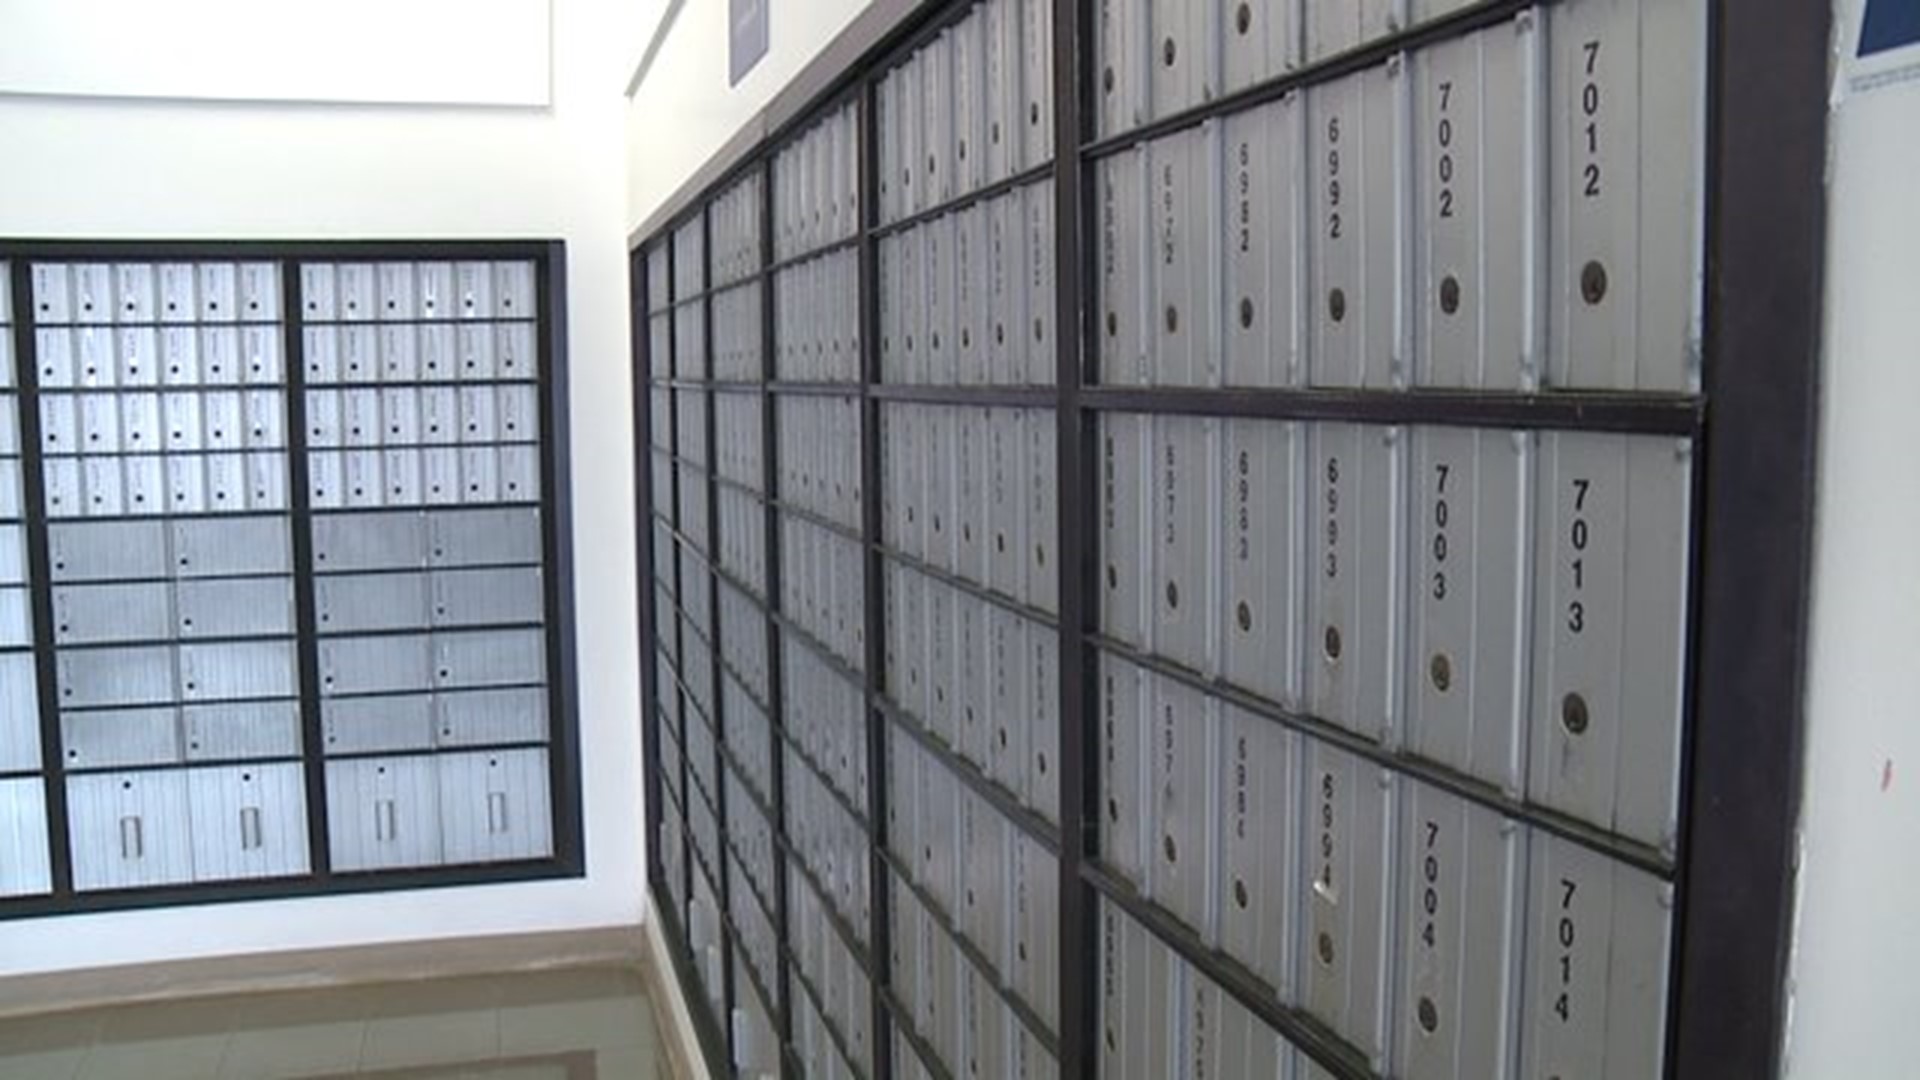 1,100 absentee ballot requests found in Rock Island P.O. box